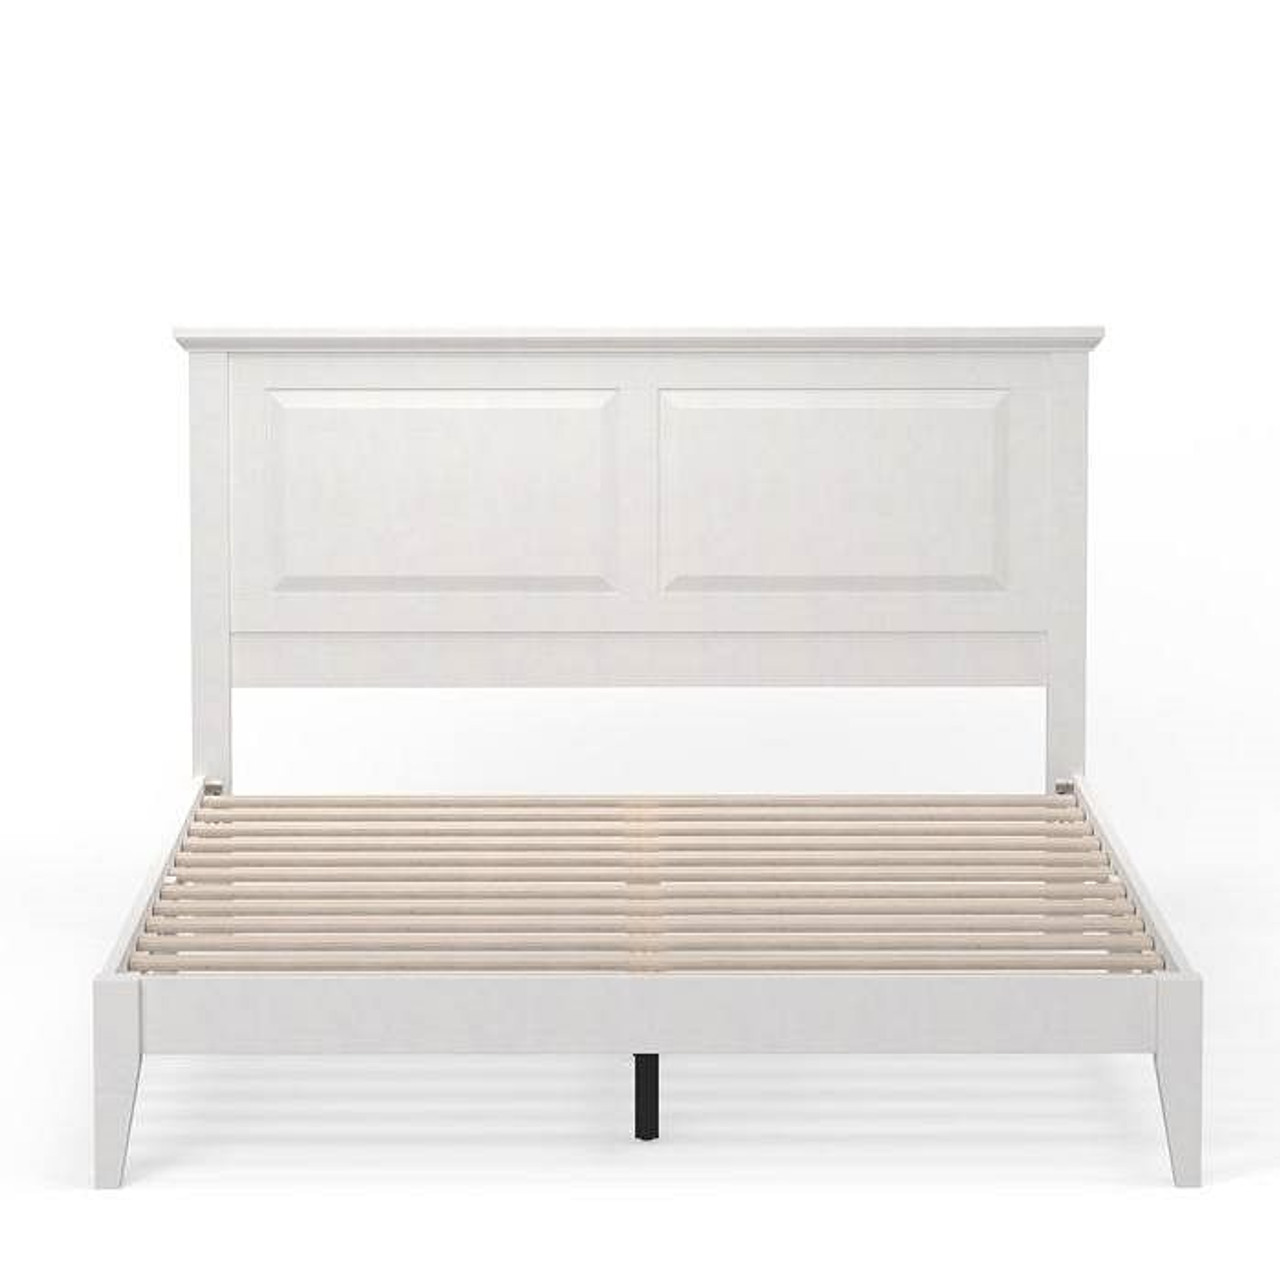 Queen Traditional Solid Oak Wooden Platform Bed Frame with Headboard in White